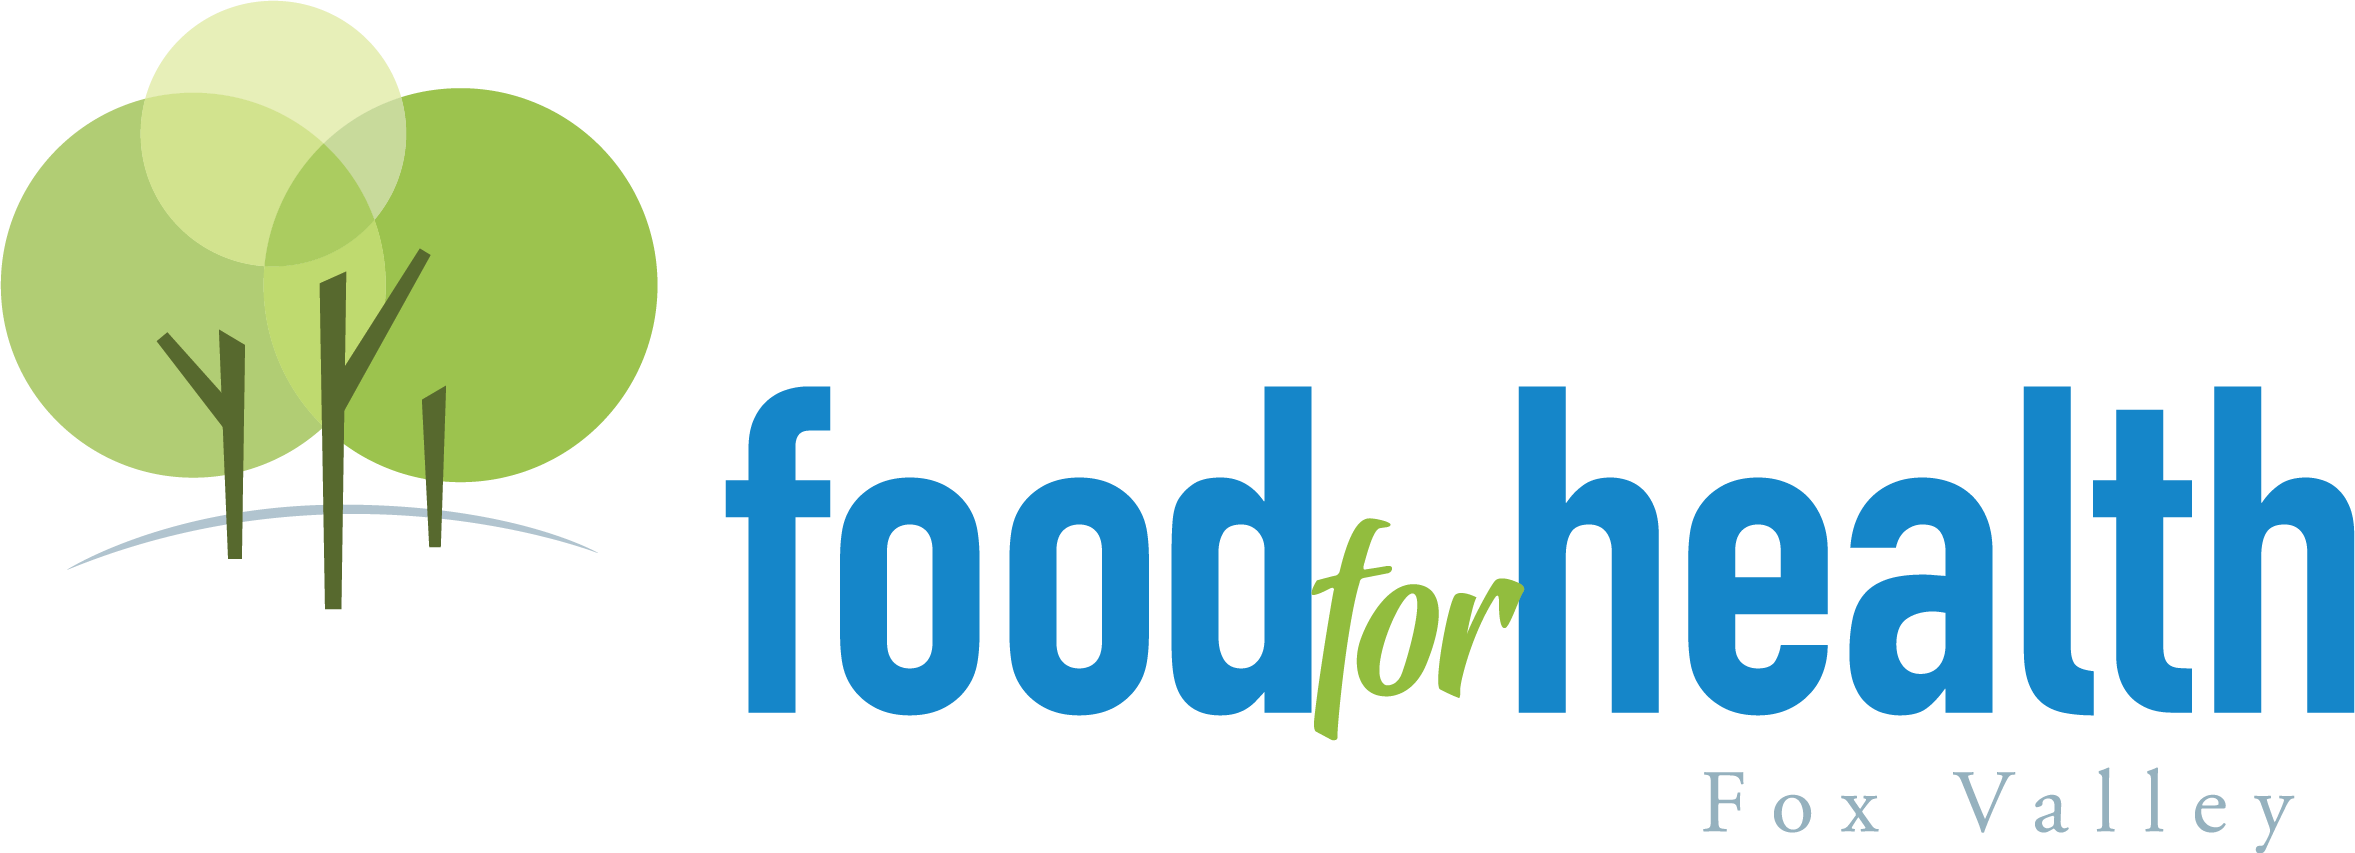 Fox Valley Food For Health